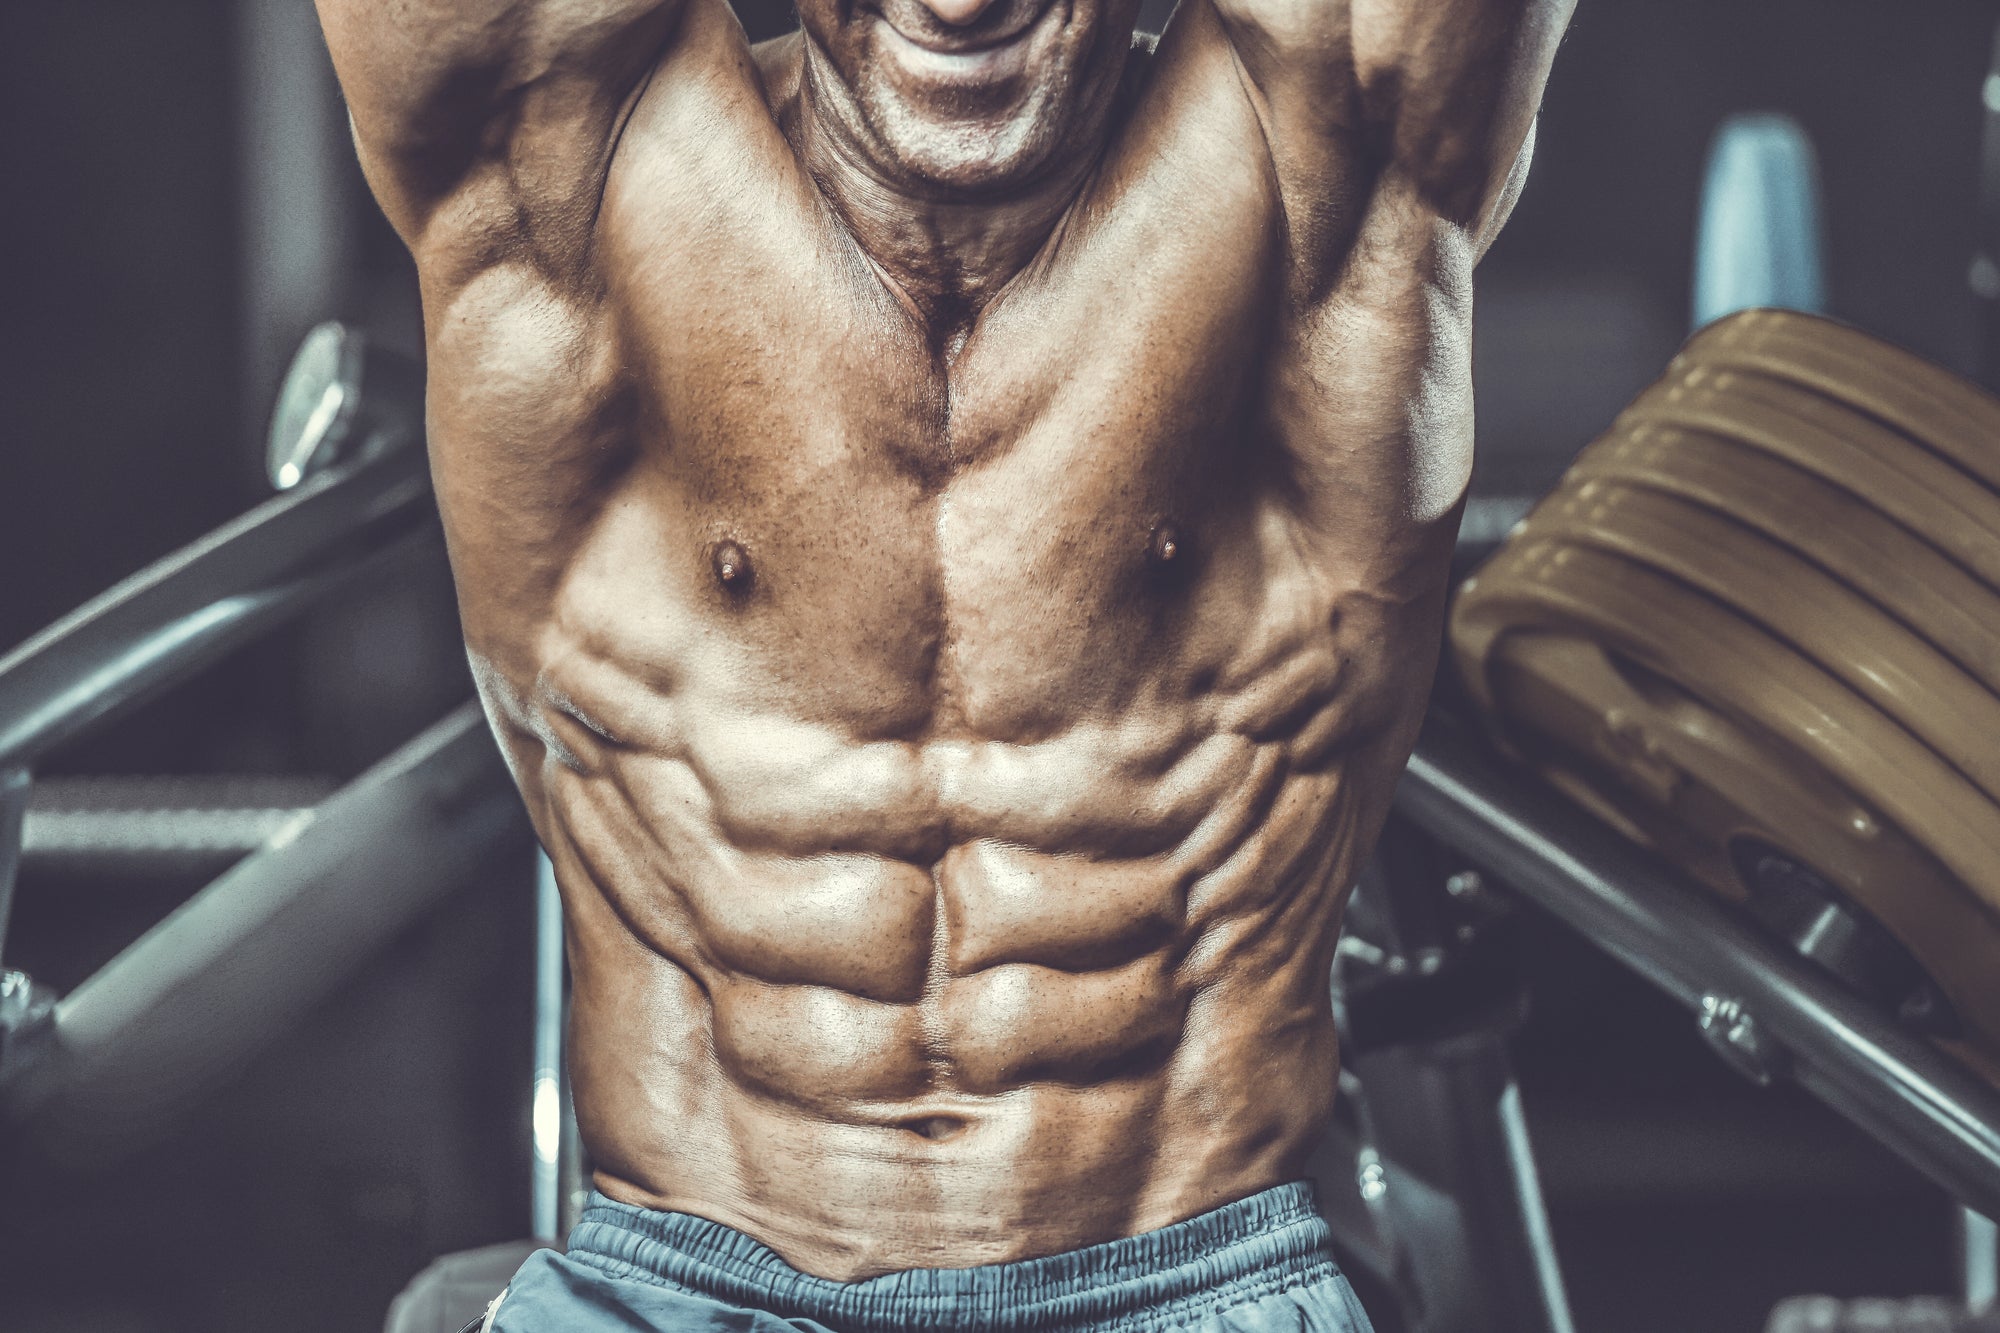 Steps to get 8-Pack Abs